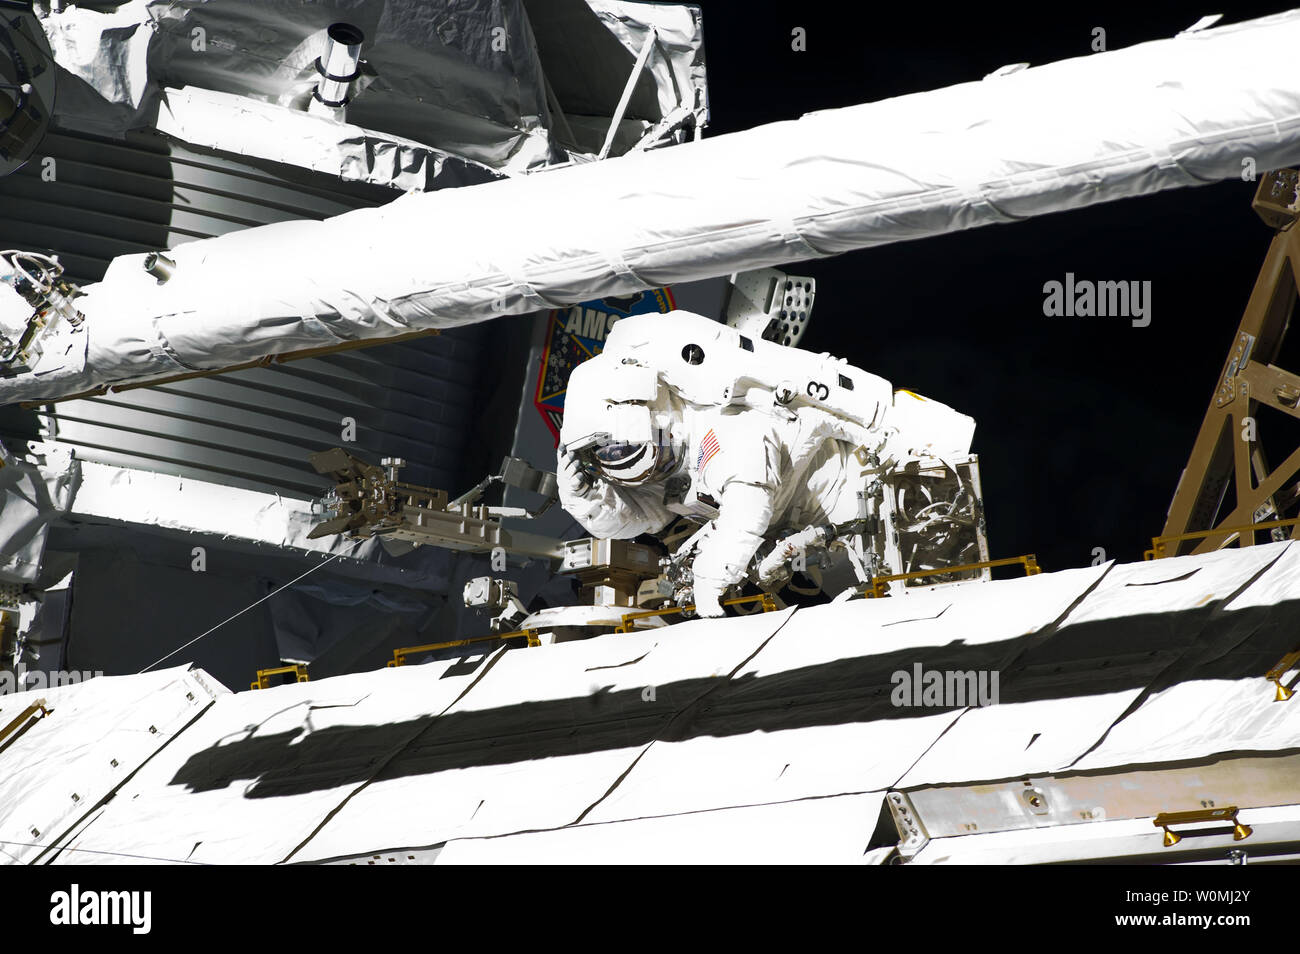 NASA astronaut Michael Fincke participates in the mission's fourth session of extravehicular activity (EVA) as construction and maintenance continue on the International Space Station on May 27, 2011. This is expected to be the very last spacewalk to be performed by shuttle crew astronauts.    UPI/NASA Stock Photo